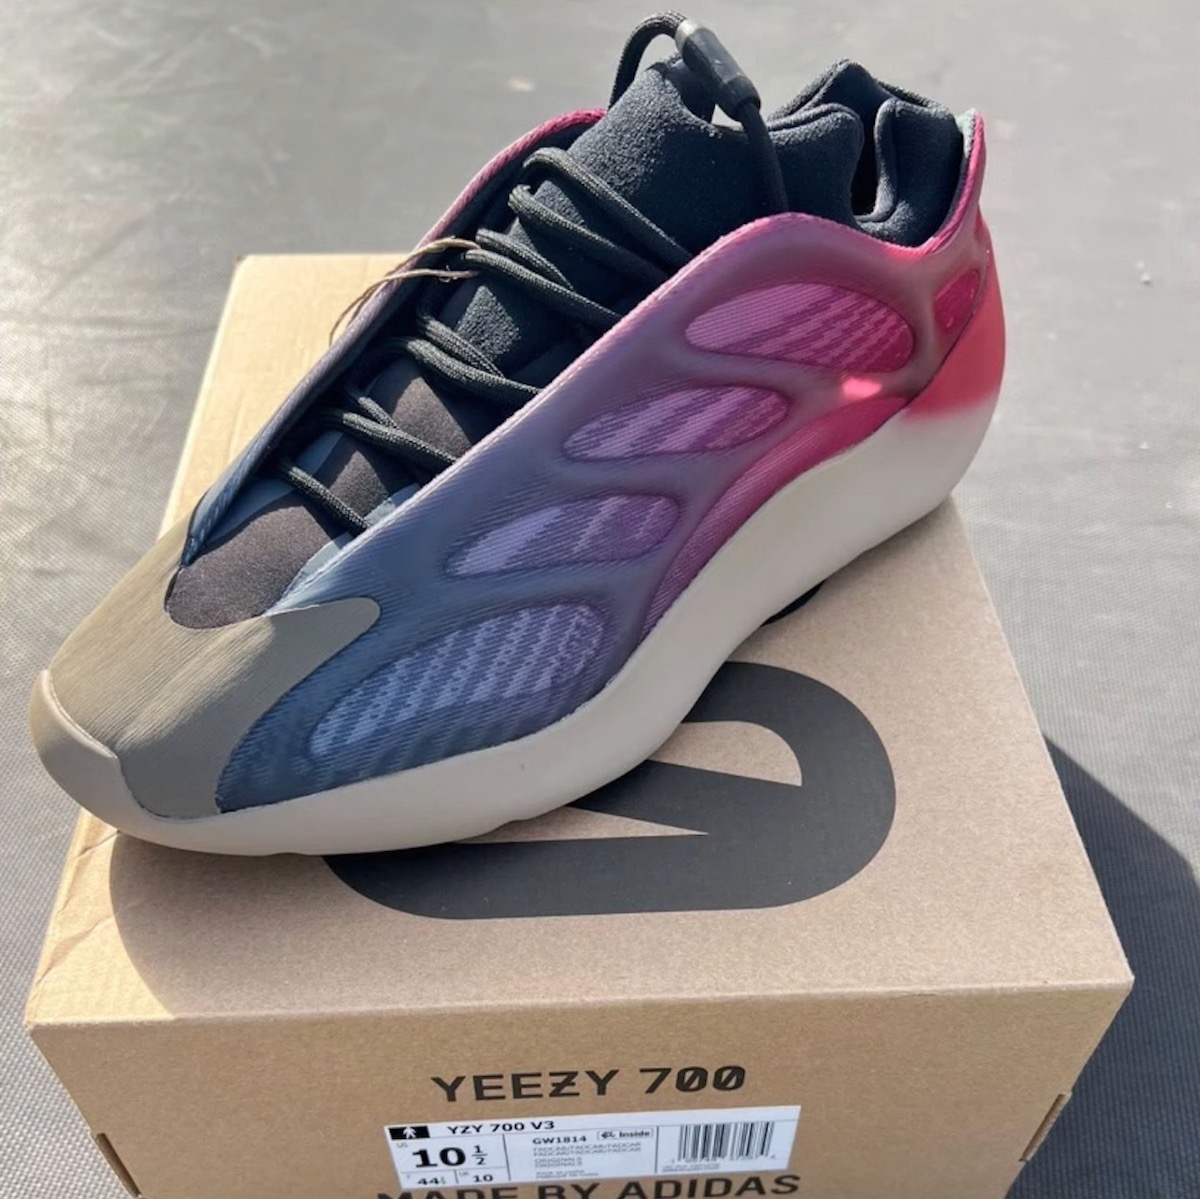 adidas Yeezy 700 V3 “Fade Carbon”が国内5月21日に発売予定 | UP TO DATE